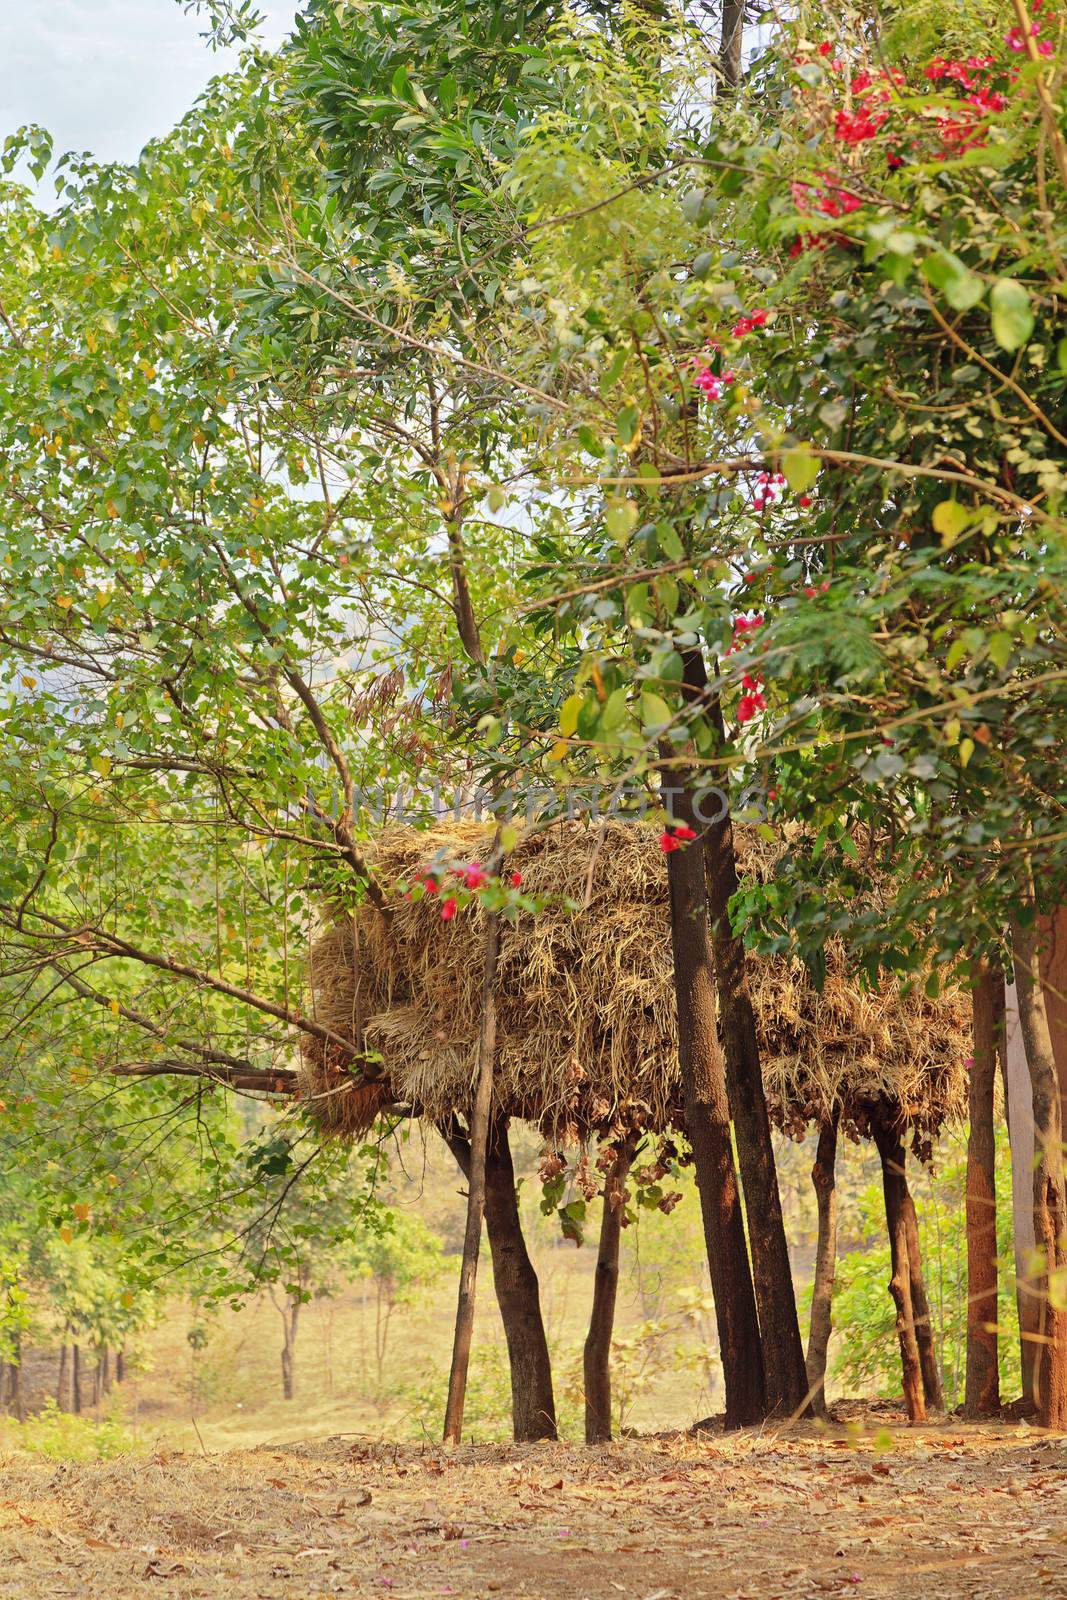 Vertical color landscape of a haystack stored on stilts to prevent ground damage. Shot taken in the rural countryside of Maharashtra India within an orchard and footpath leading past the stack.